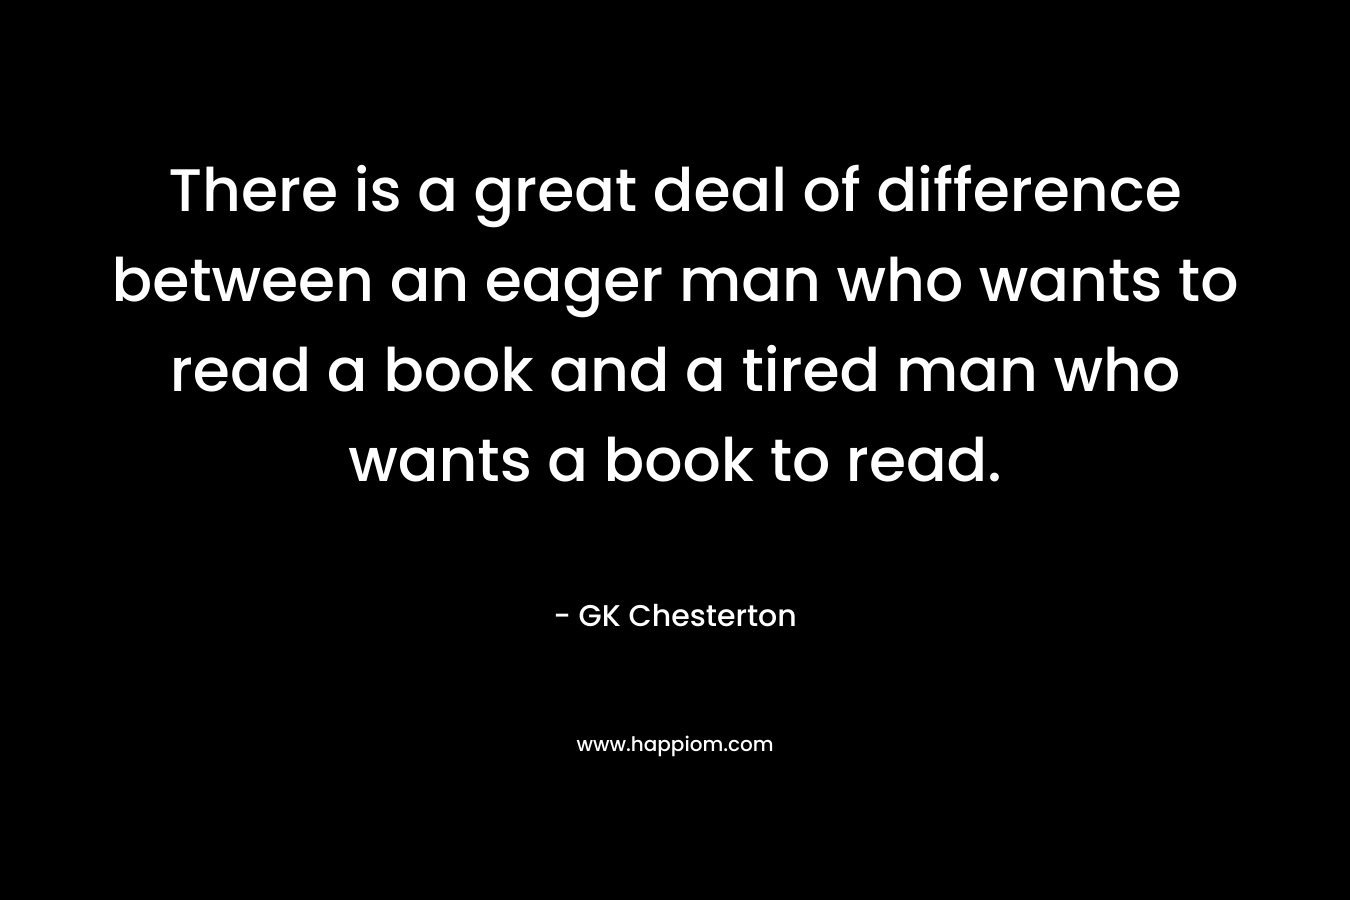 There is a great deal of difference between an eager man who wants to read a book and a tired man who wants a book to read.